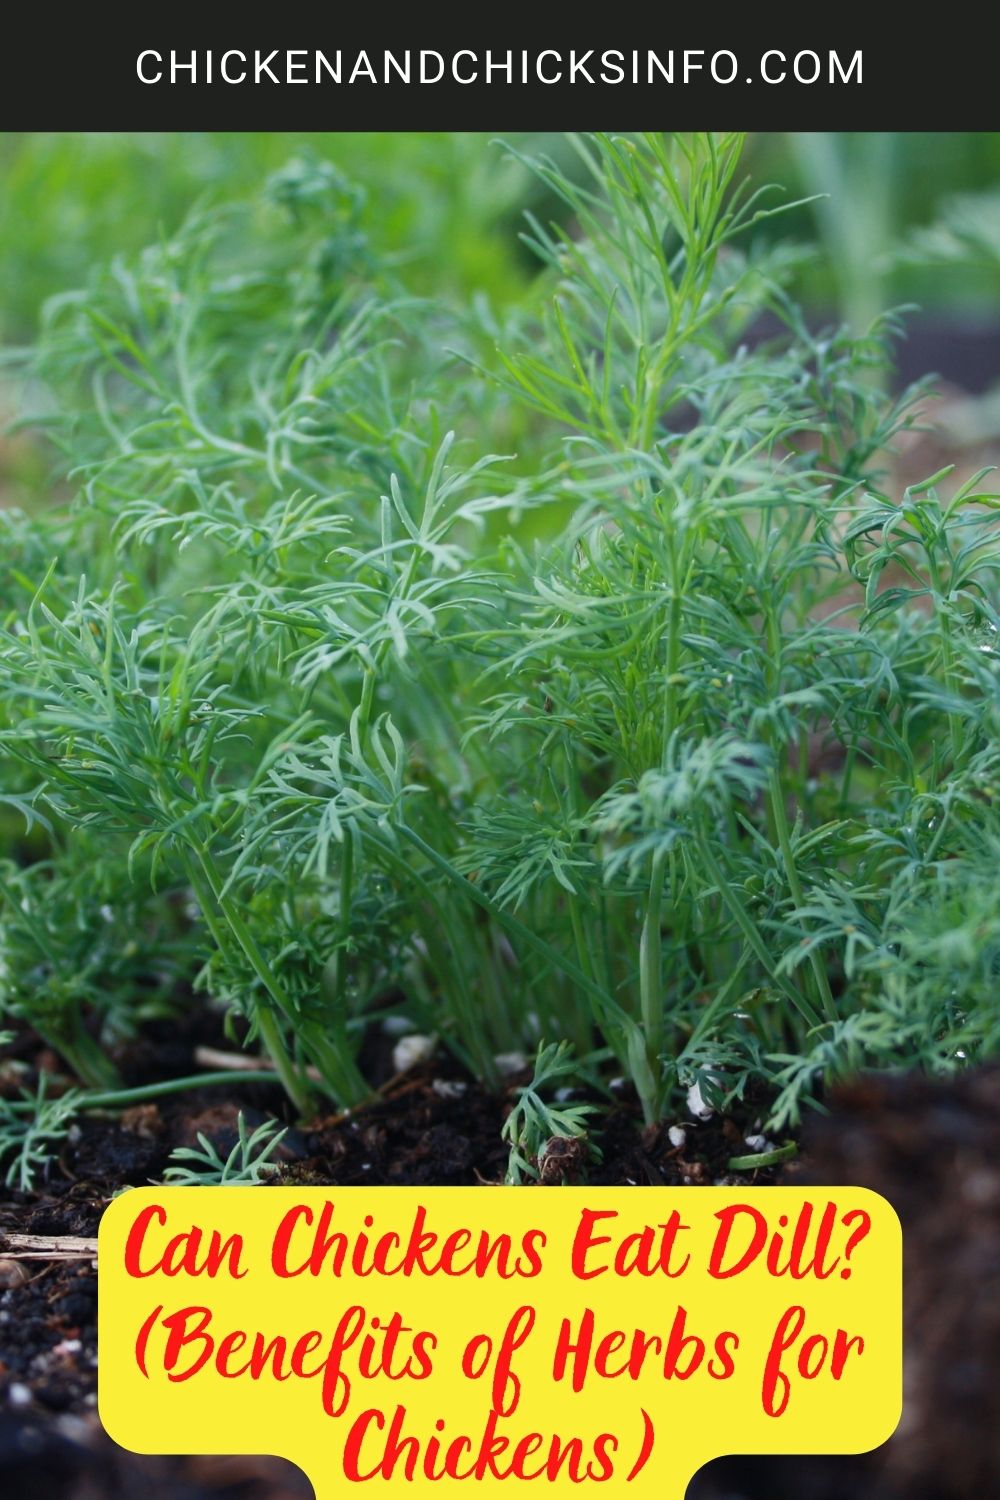 Can Chickens Eat Dill? (Benefits of Herbs for Chickens) poster.
